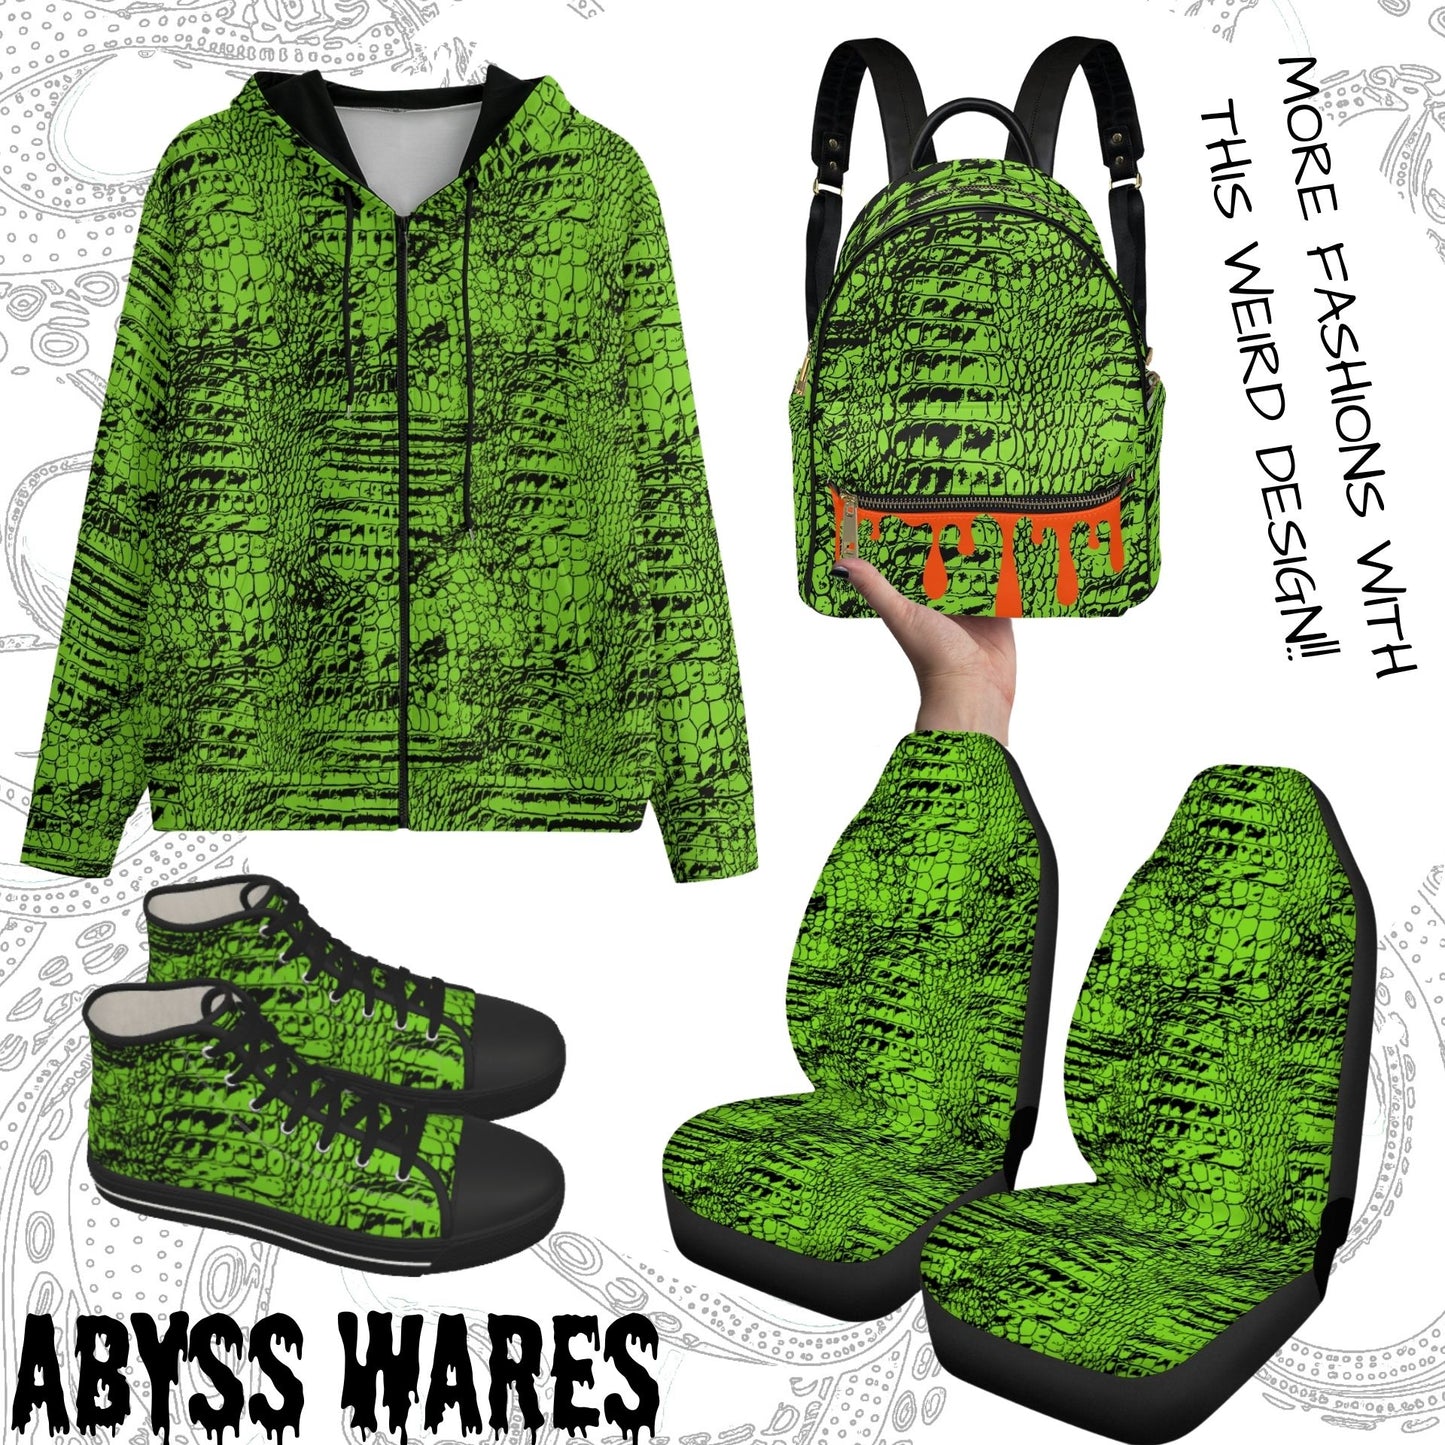 Scaley Green Boots Monster Alien Snake Skin Combat Boots Unisex EU sizing